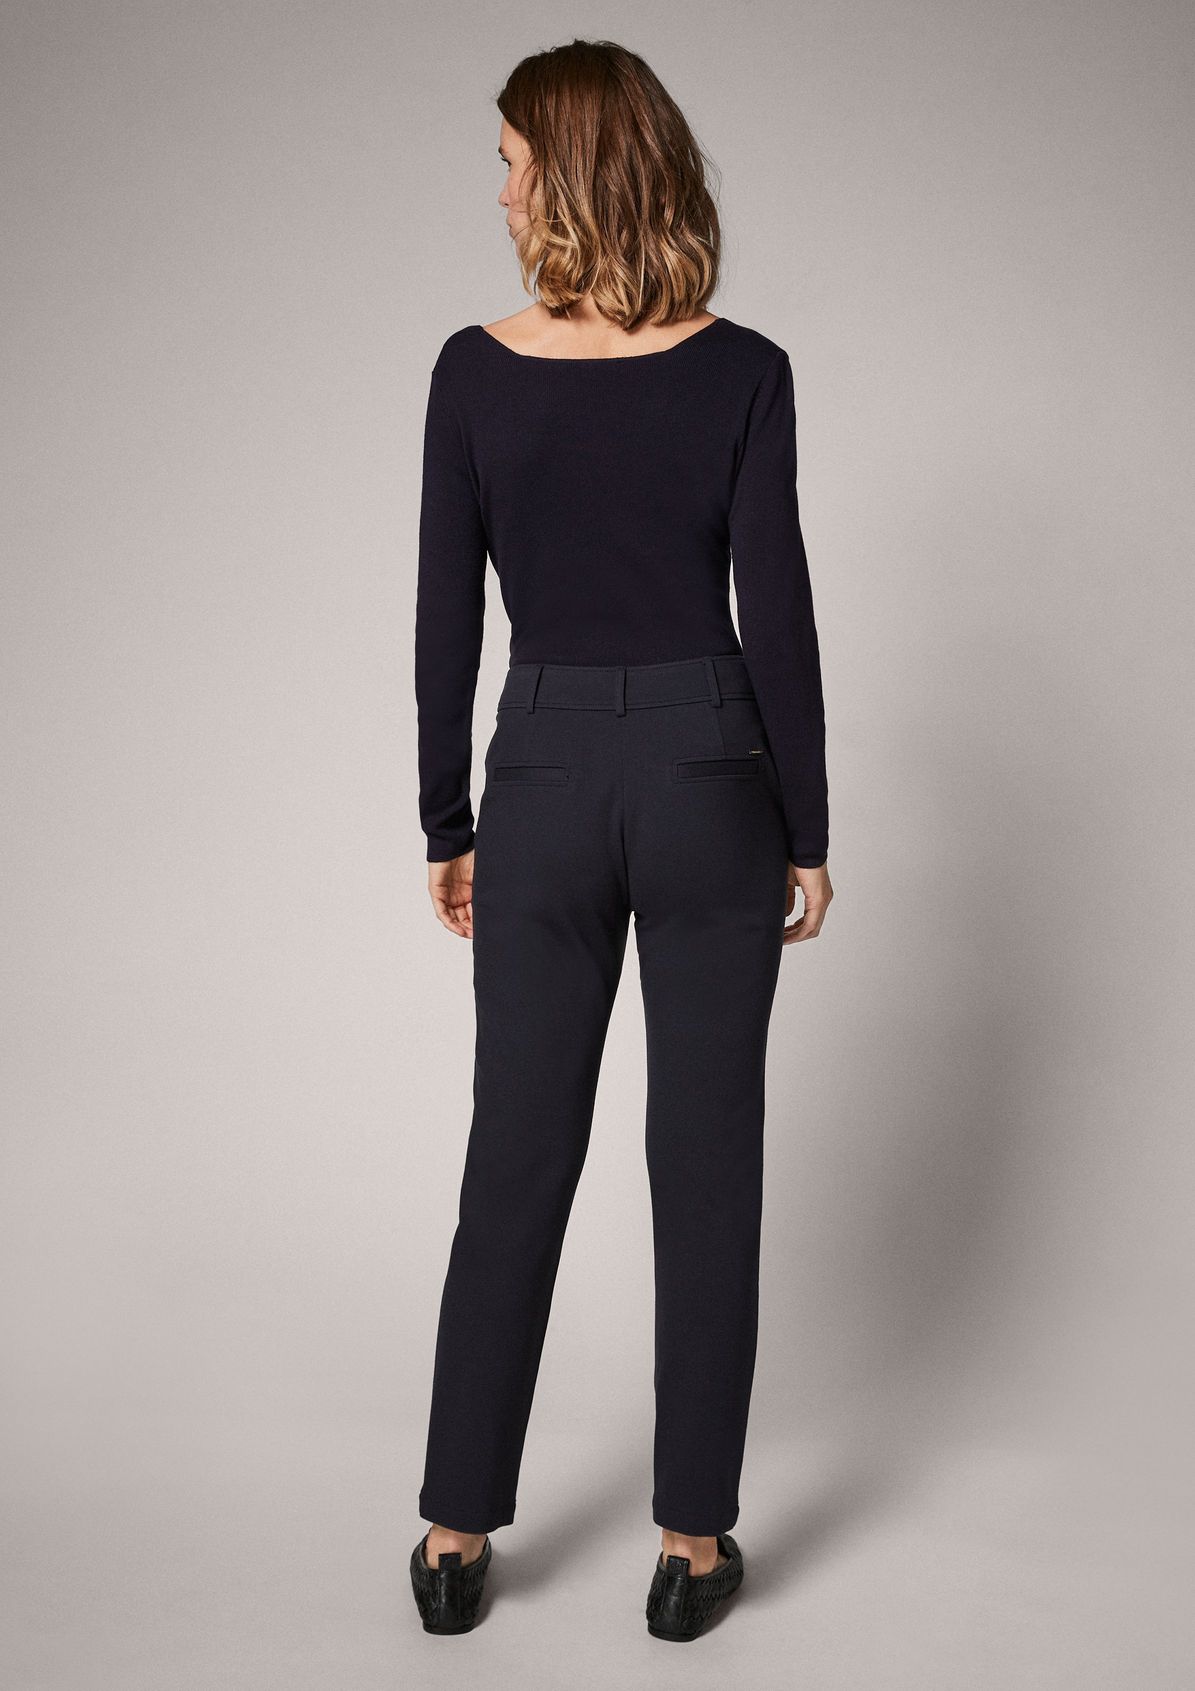 Jumper with a square neckline from comma